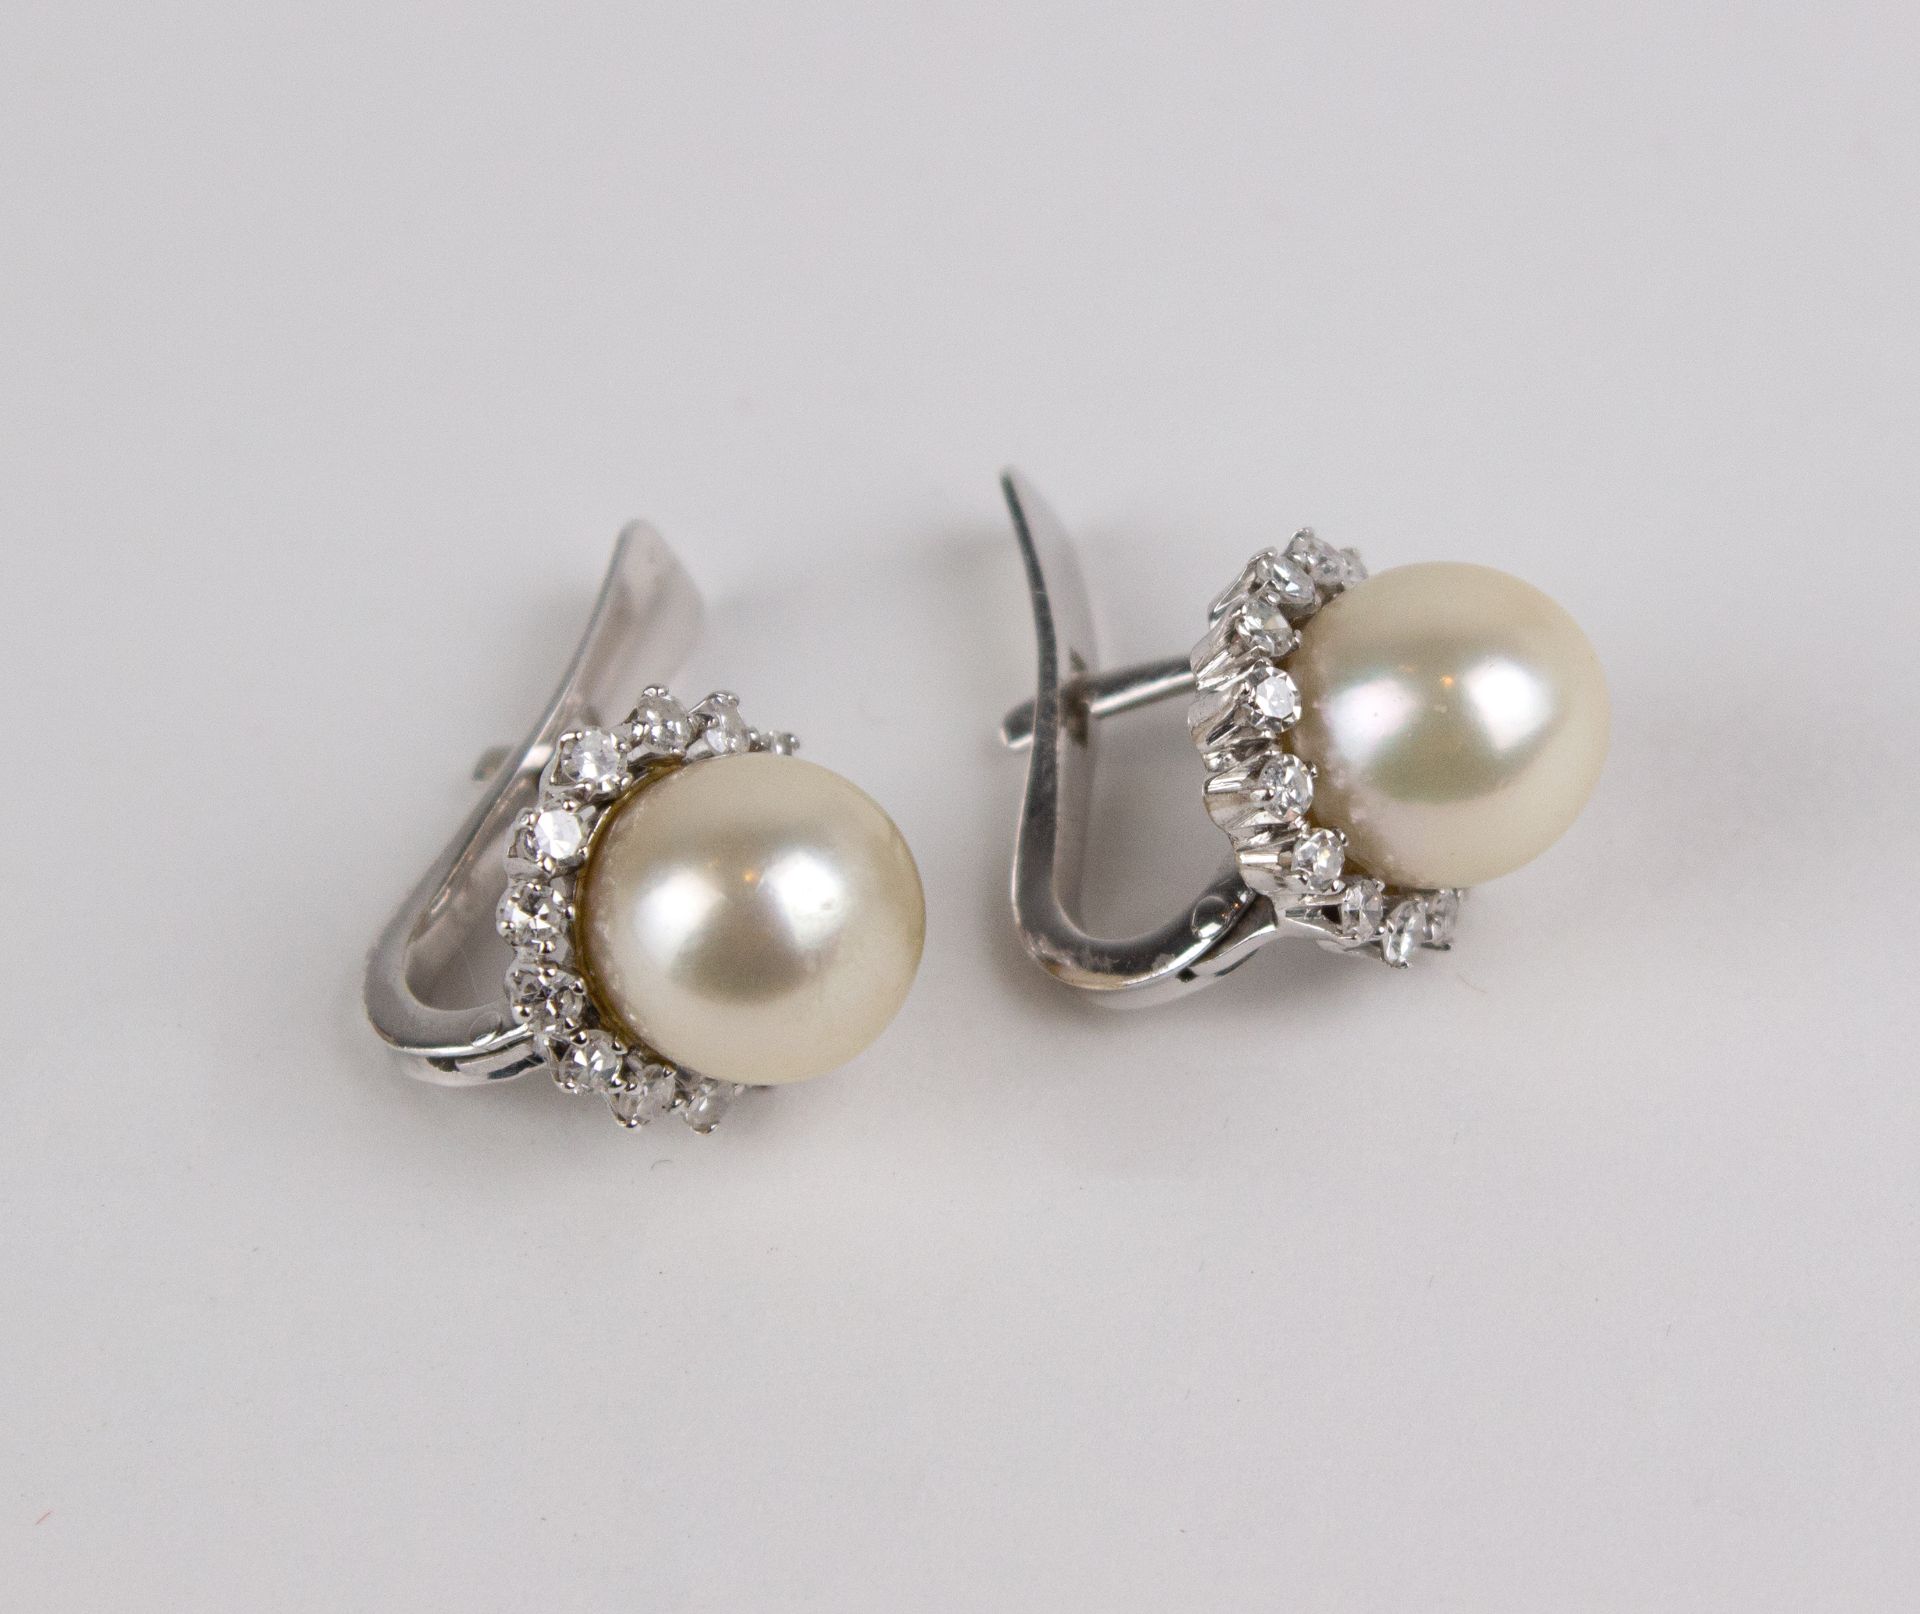 Carreras. A pair of diamond and cultured pearls cluster earrings - Image 2 of 4